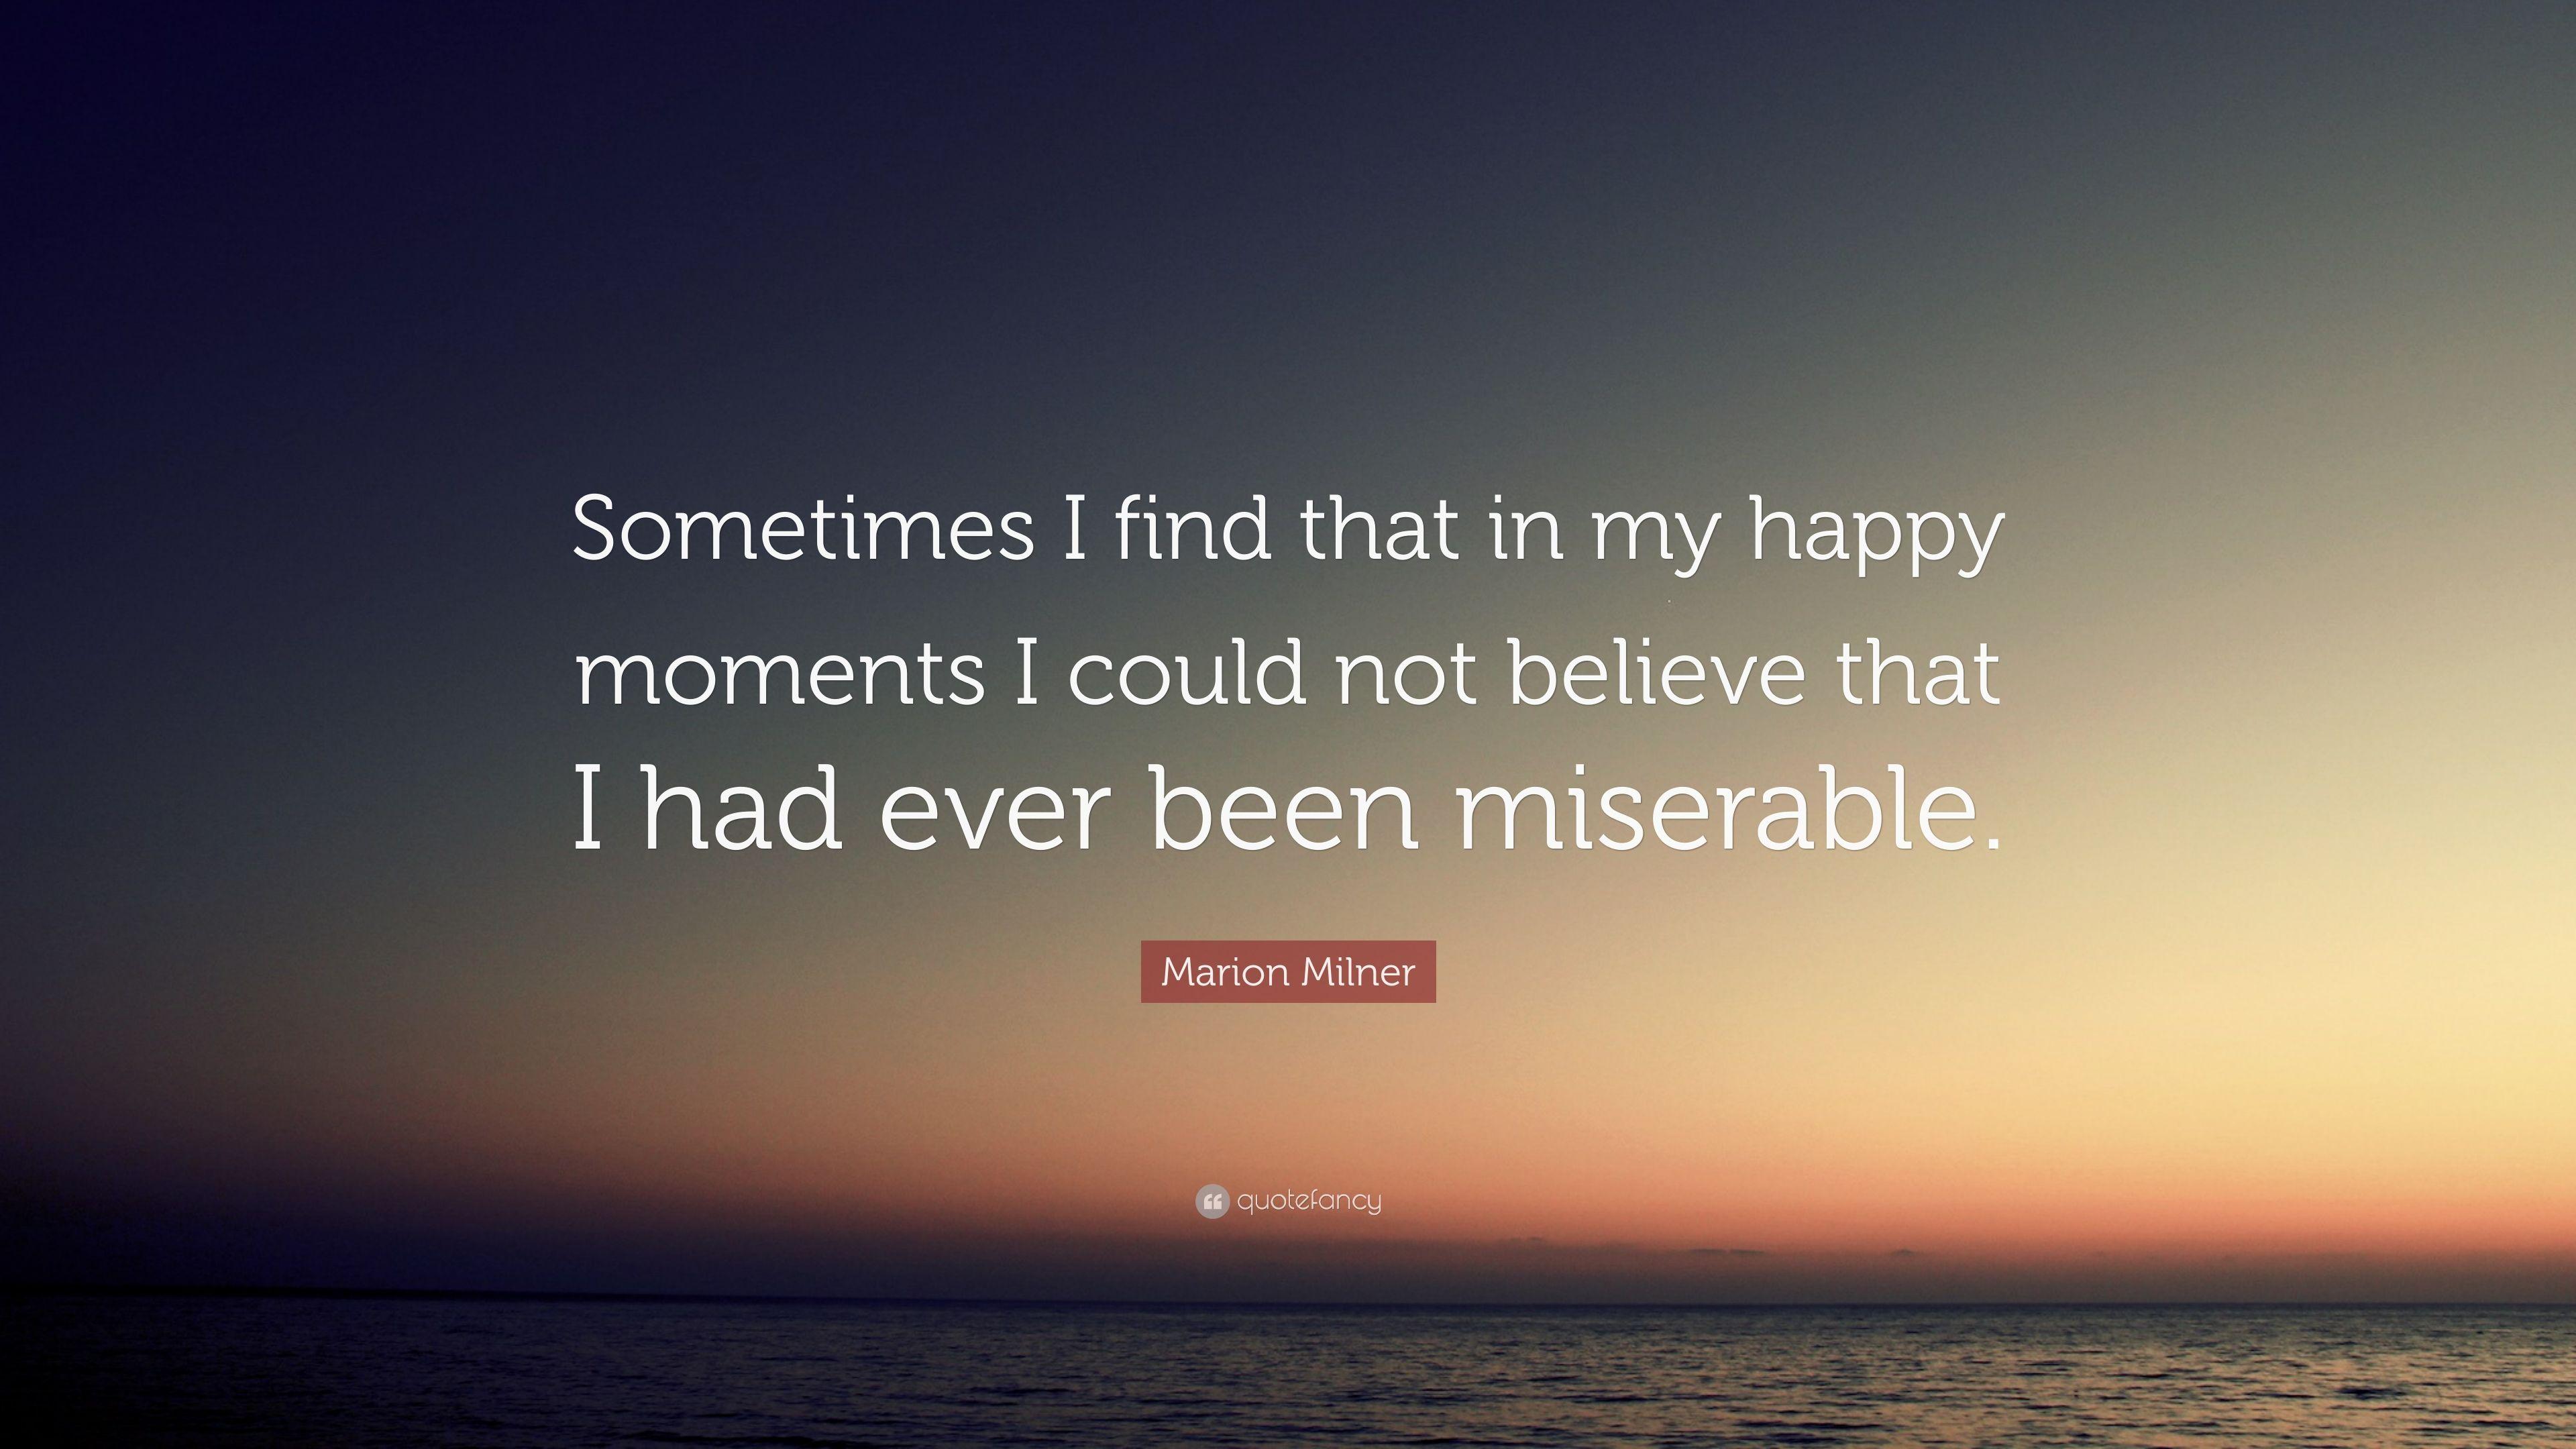 Marion Milner Quote: “Sometimes I find that in my happy moments I